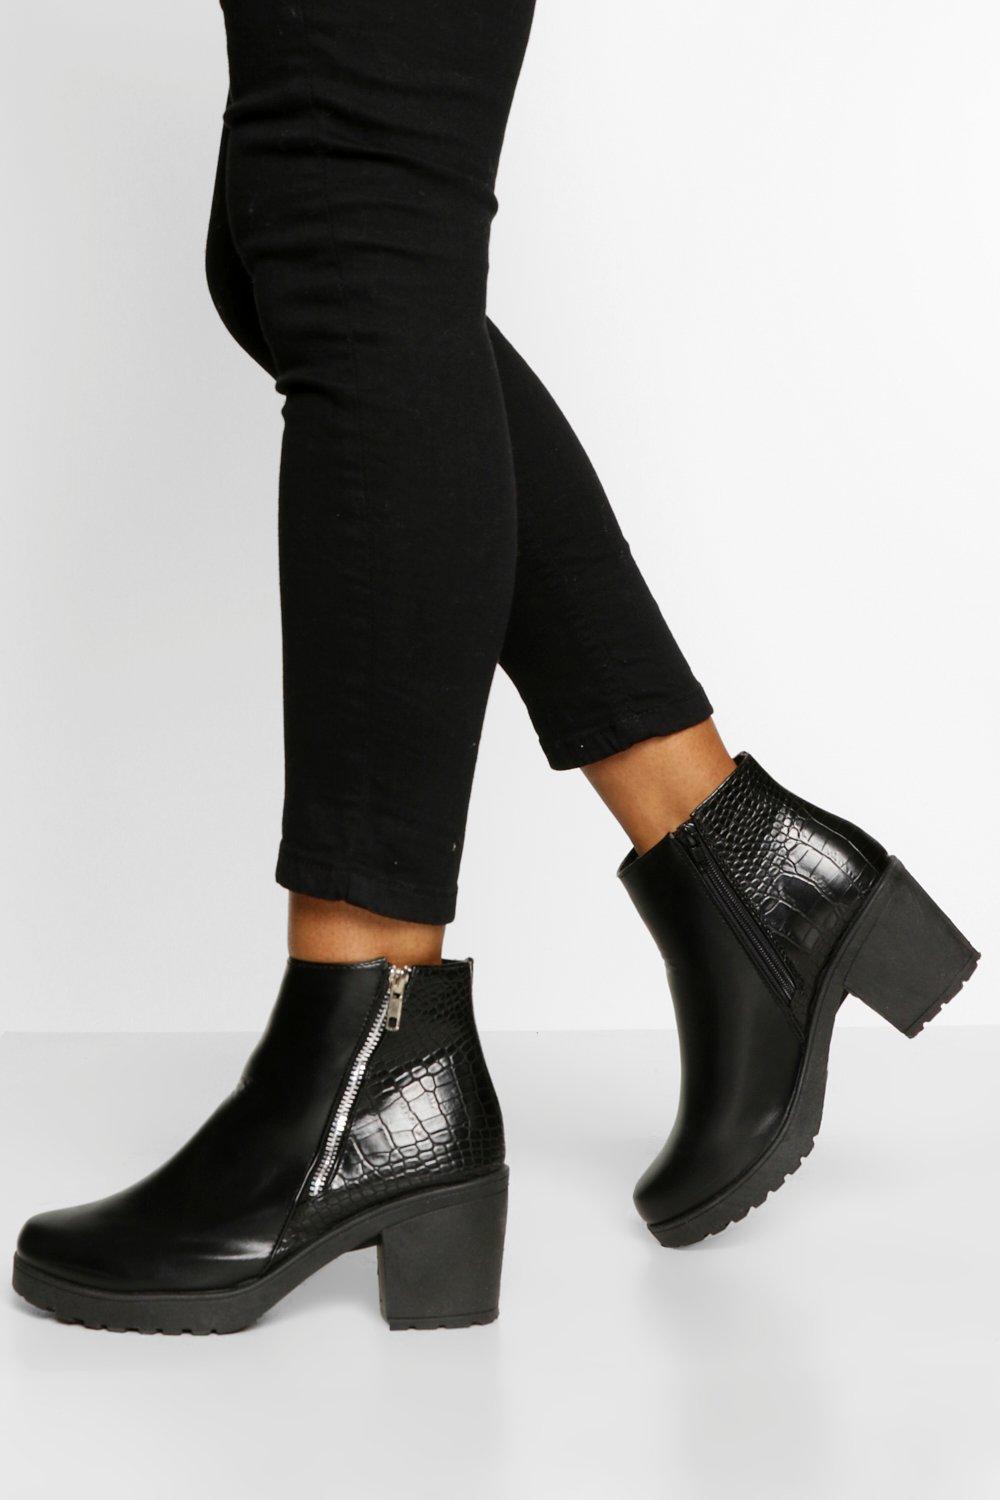 womens chunky chelsea boots uk